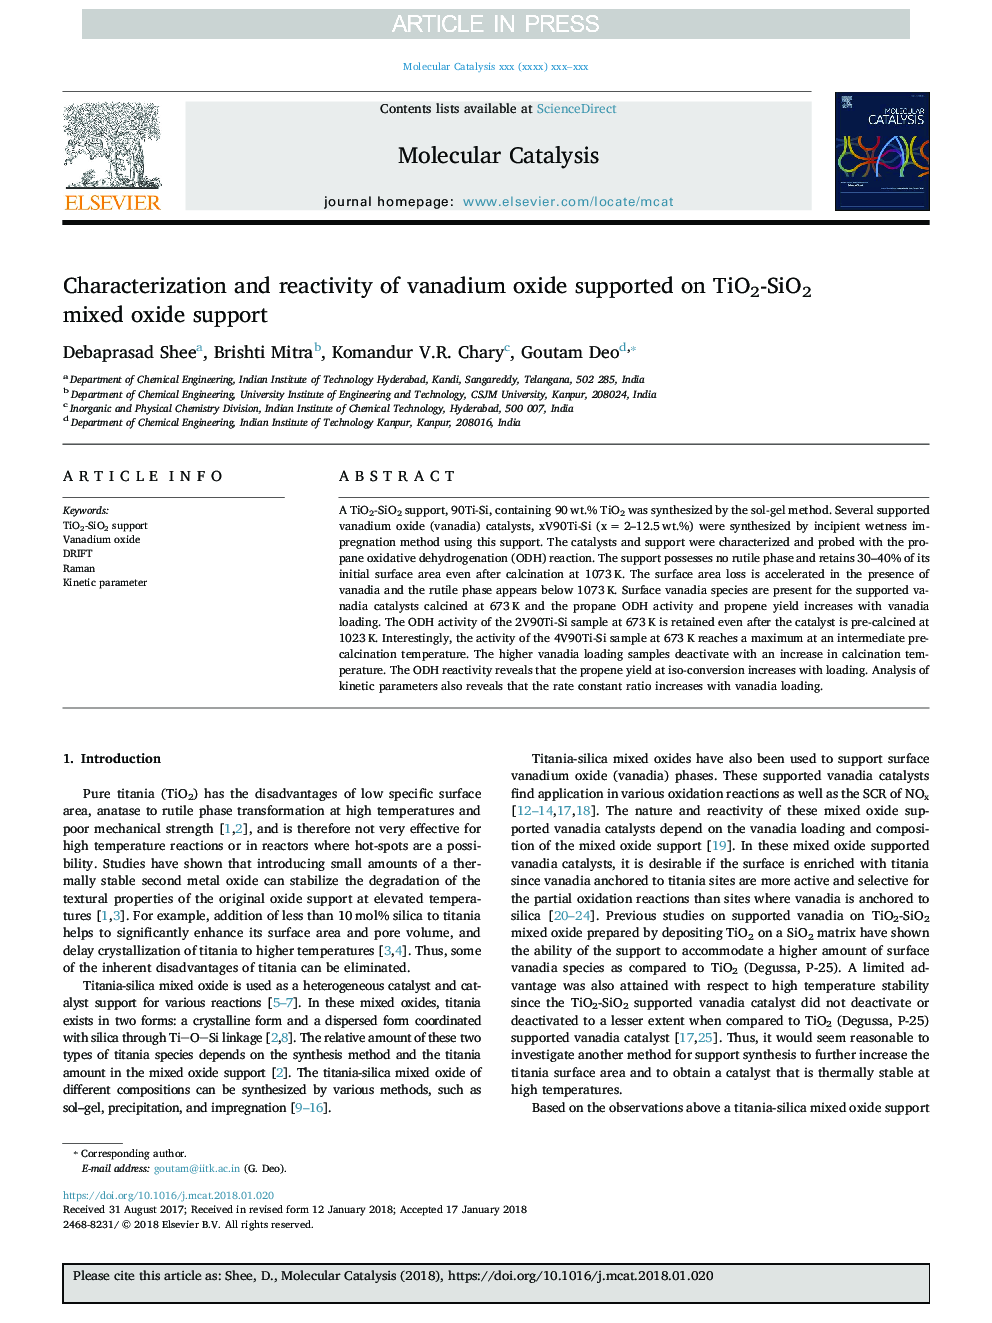 Characterization and reactivity of vanadium oxide supported on TiO2-SiO2 mixed oxide support